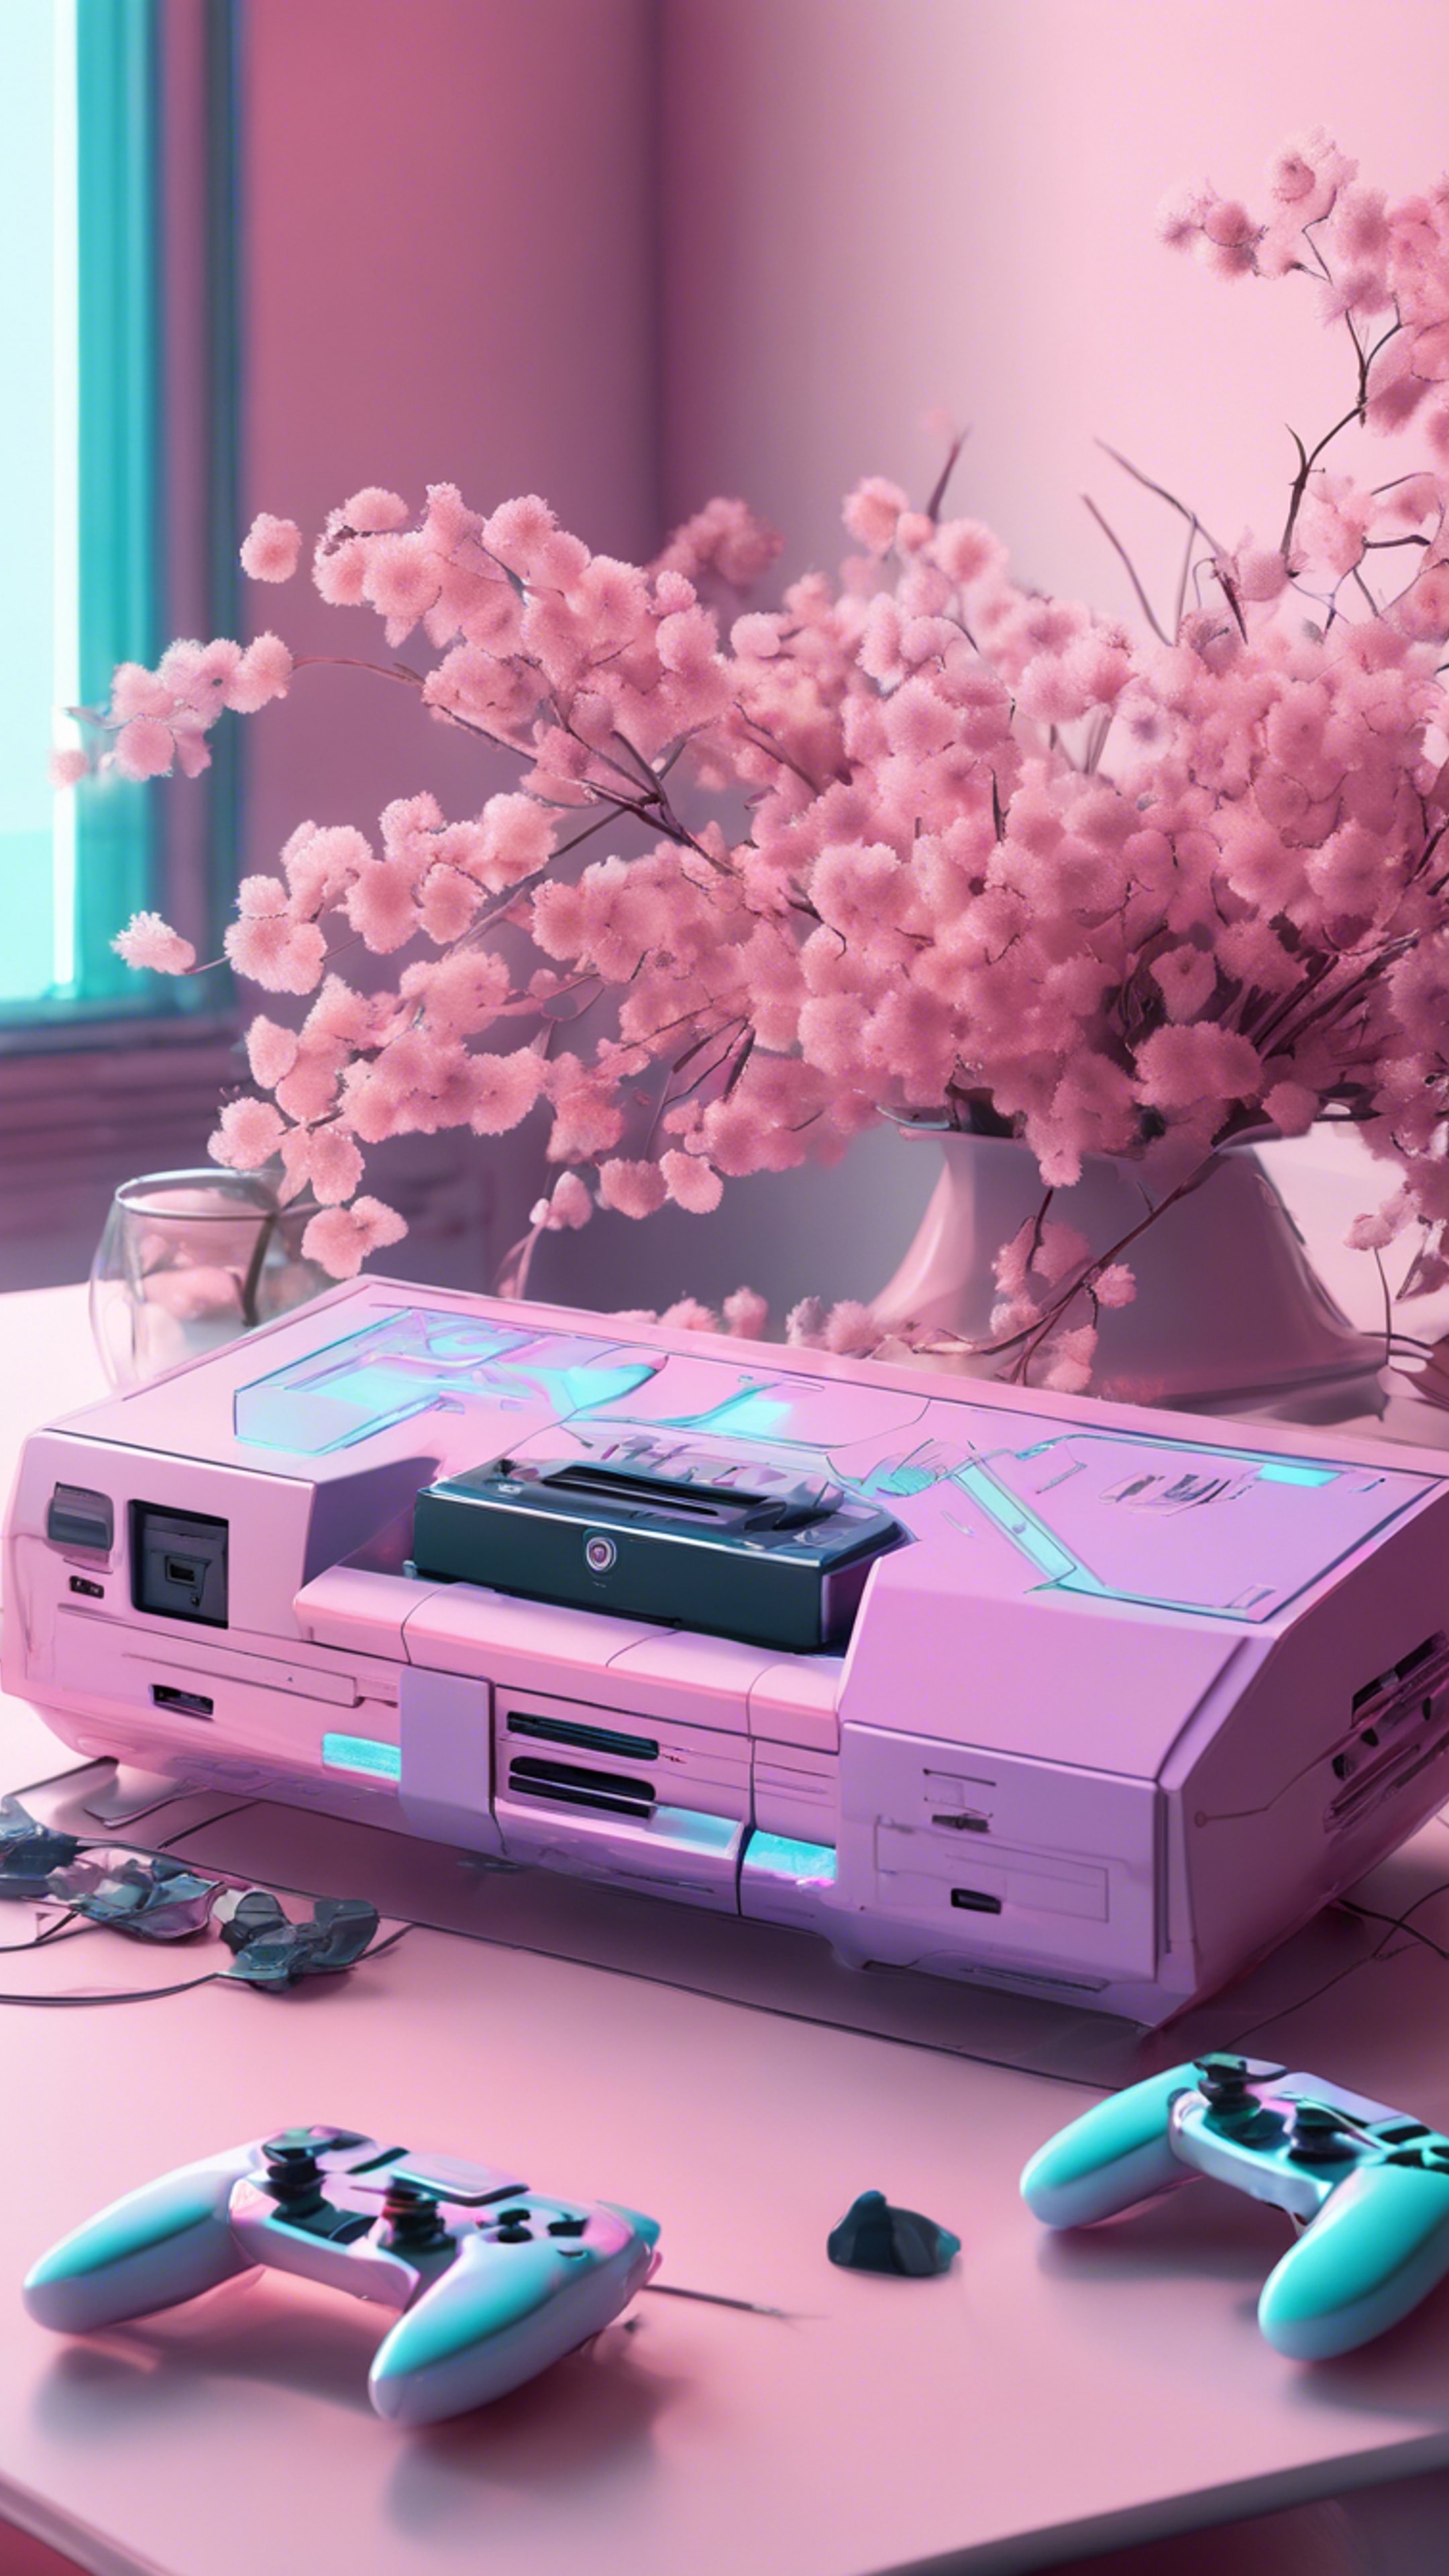 A pastel colored gaming console on a white table next to soft colored flowers in a daylight room.壁紙[43bf14bcce304acdbb24]